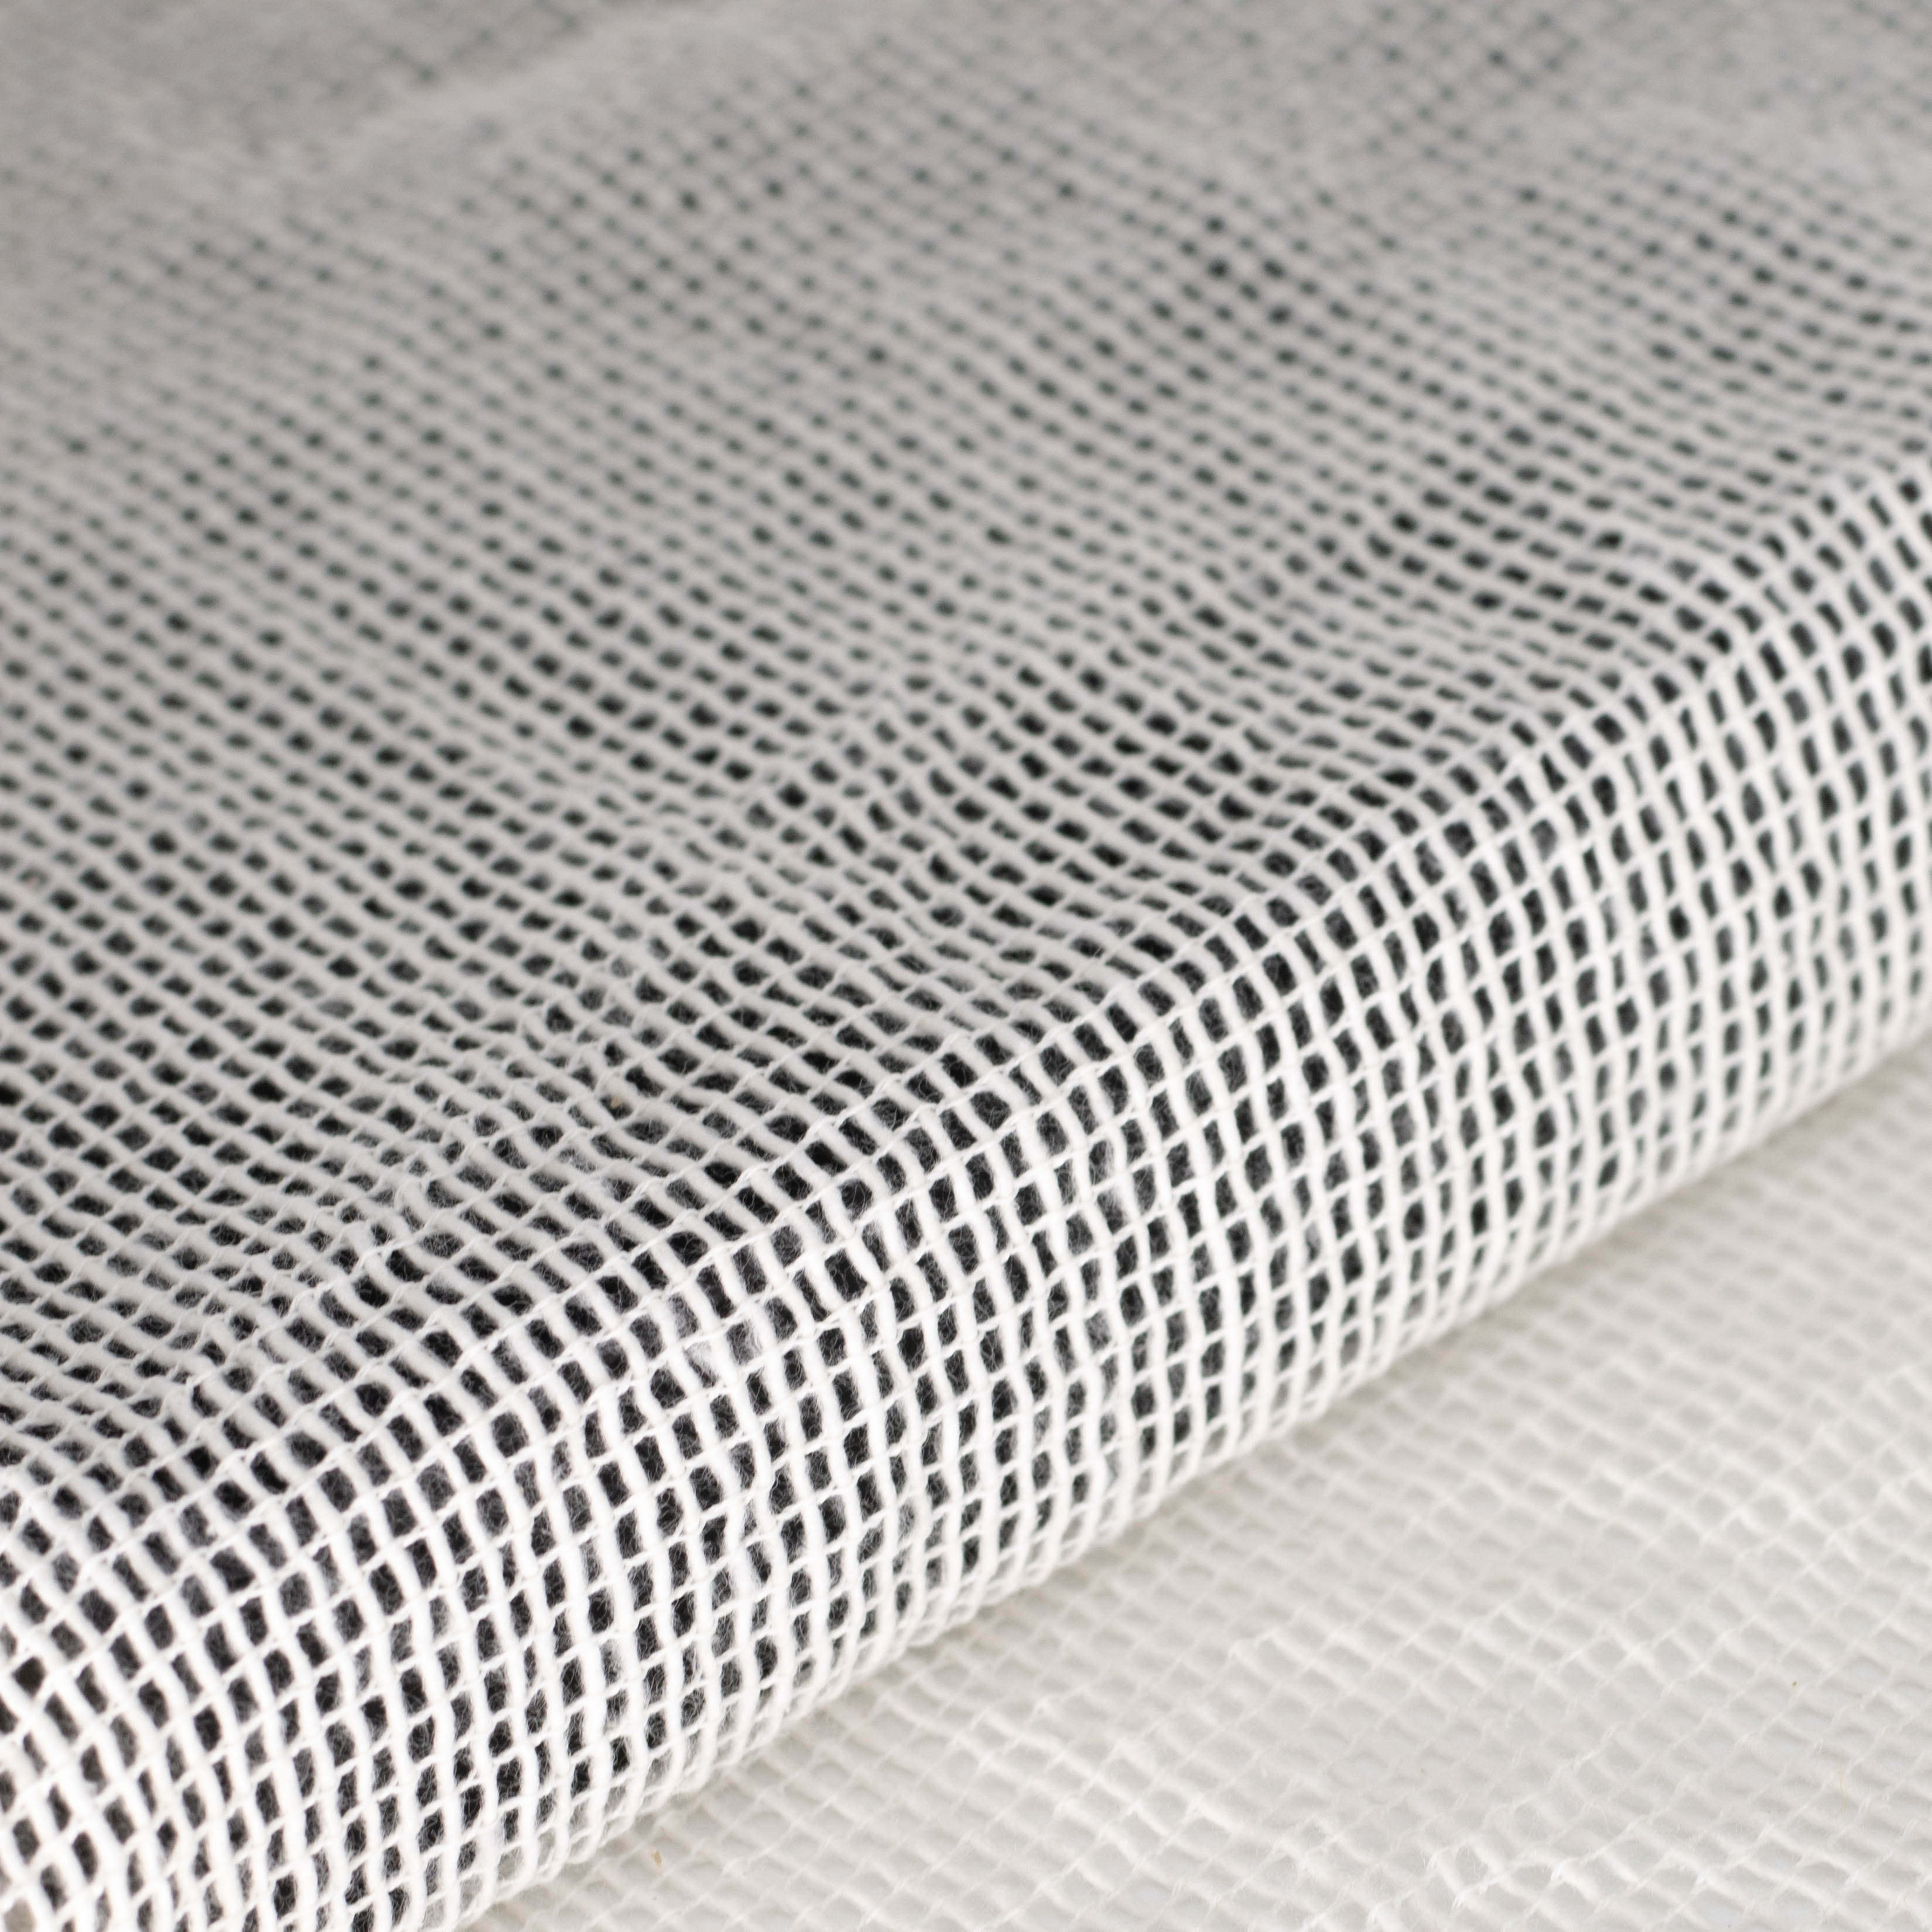 100% cotton secondary backing 4.2 by 25 meter (GO BIG)